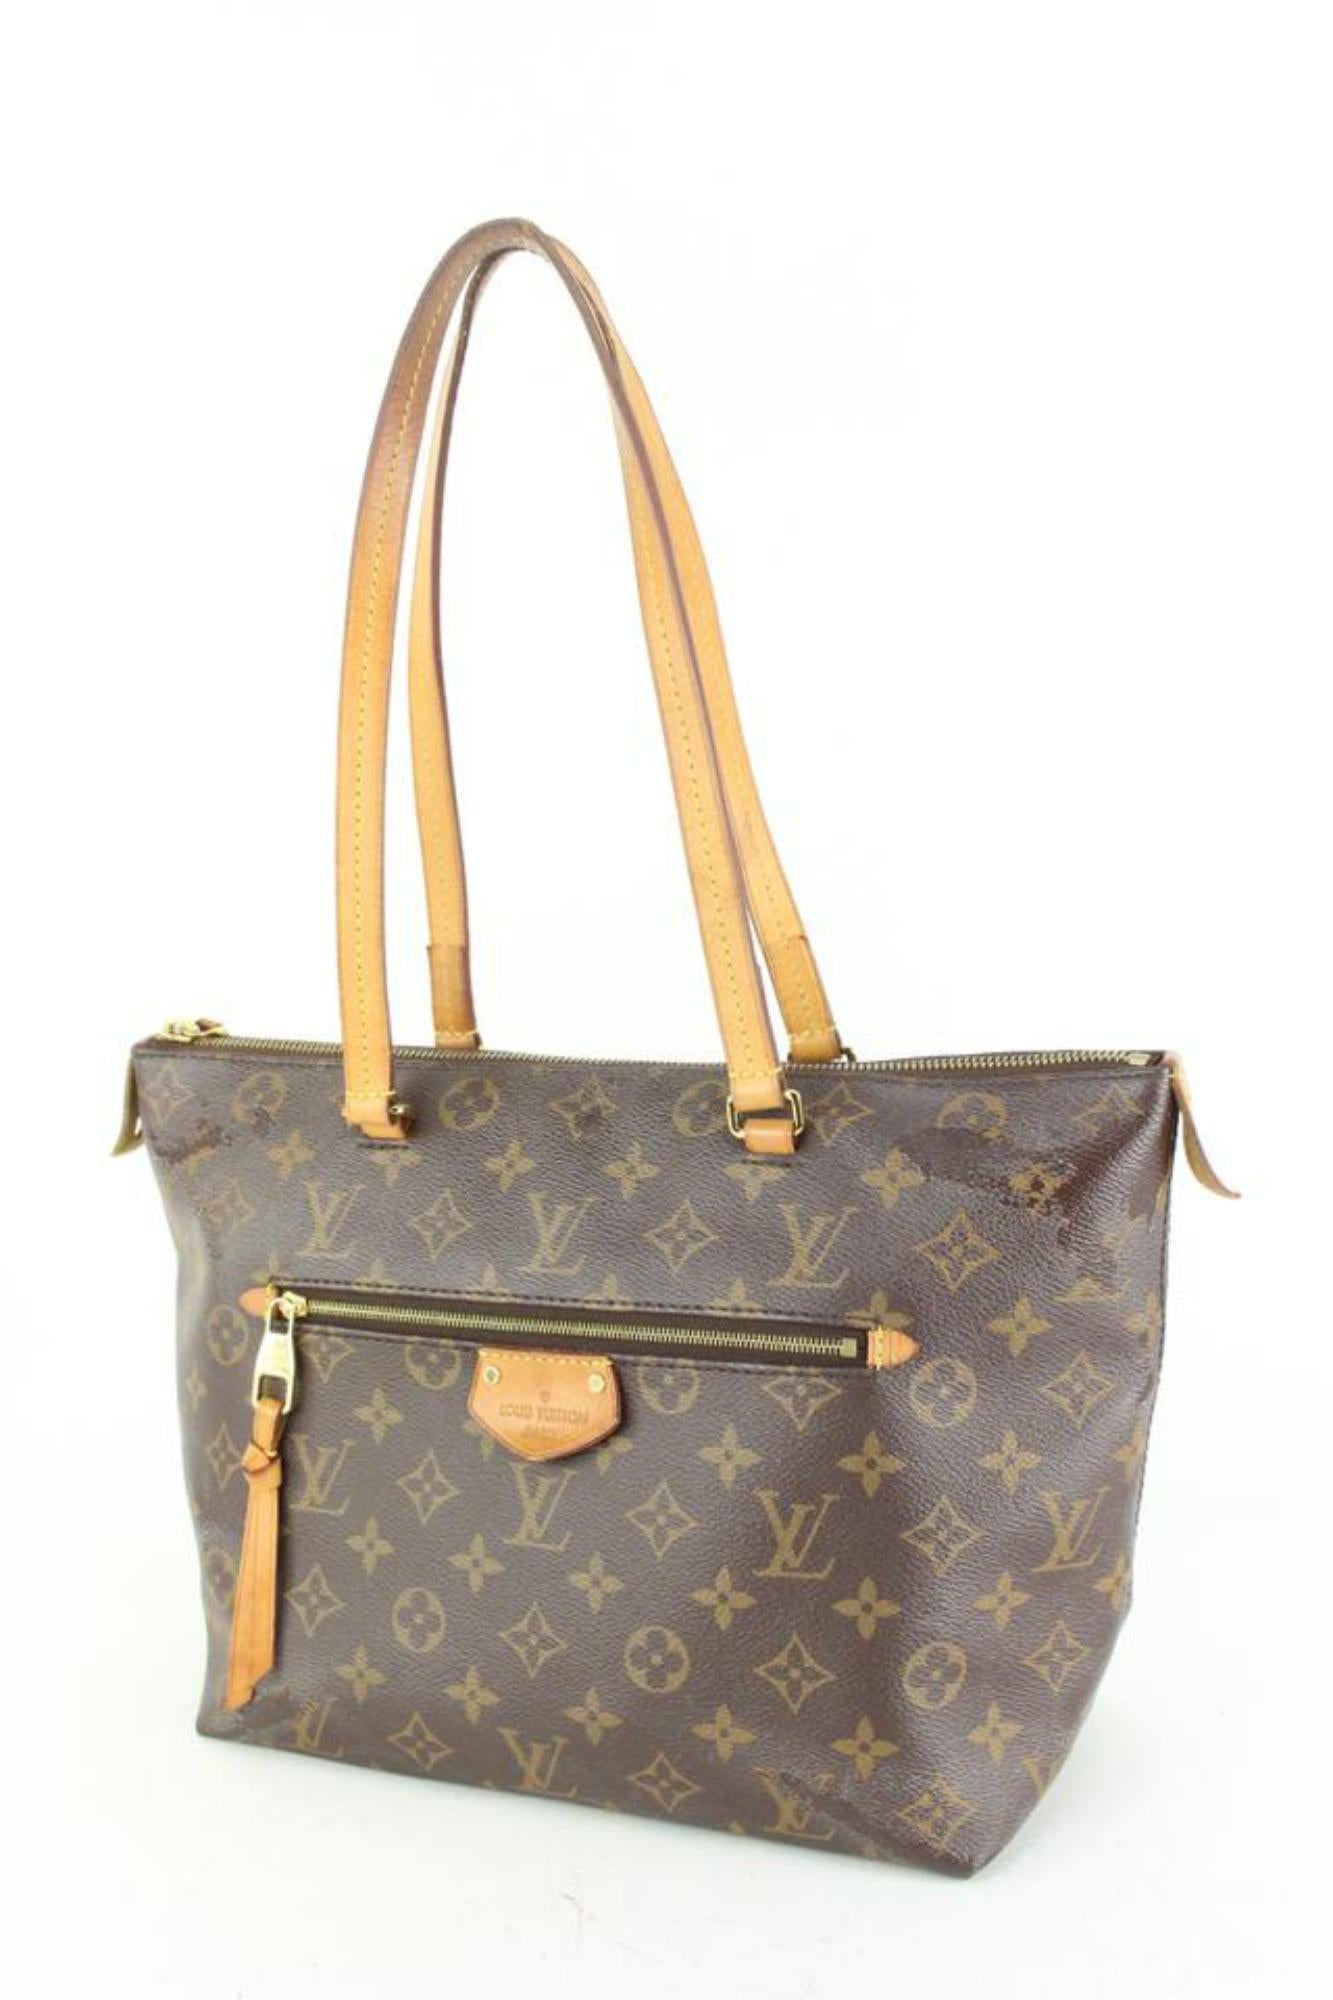 Louis Vuitton 2017 pre-owned Turenne PM tote bag, Brown